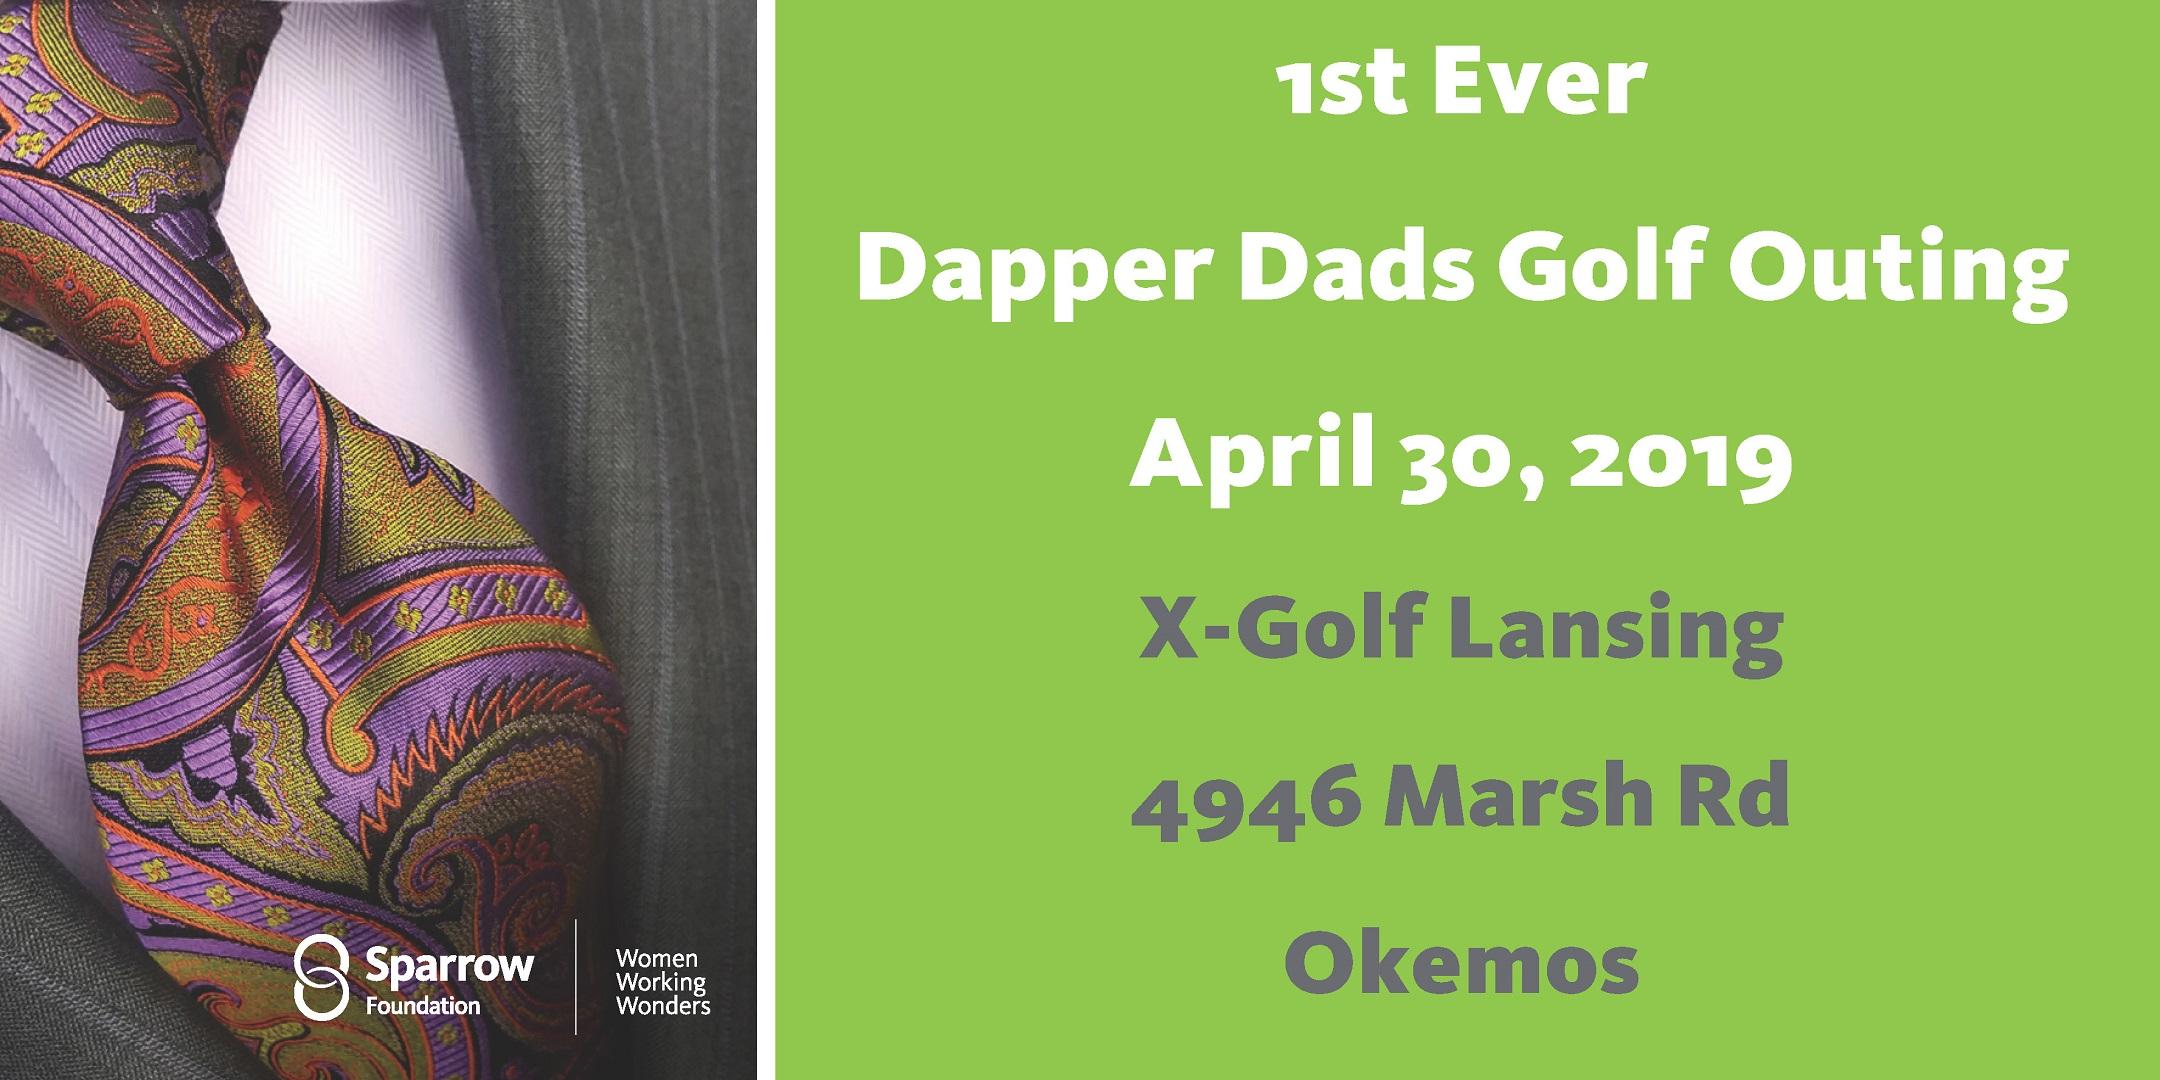 1st Ever Dapper Dads Golf Outing